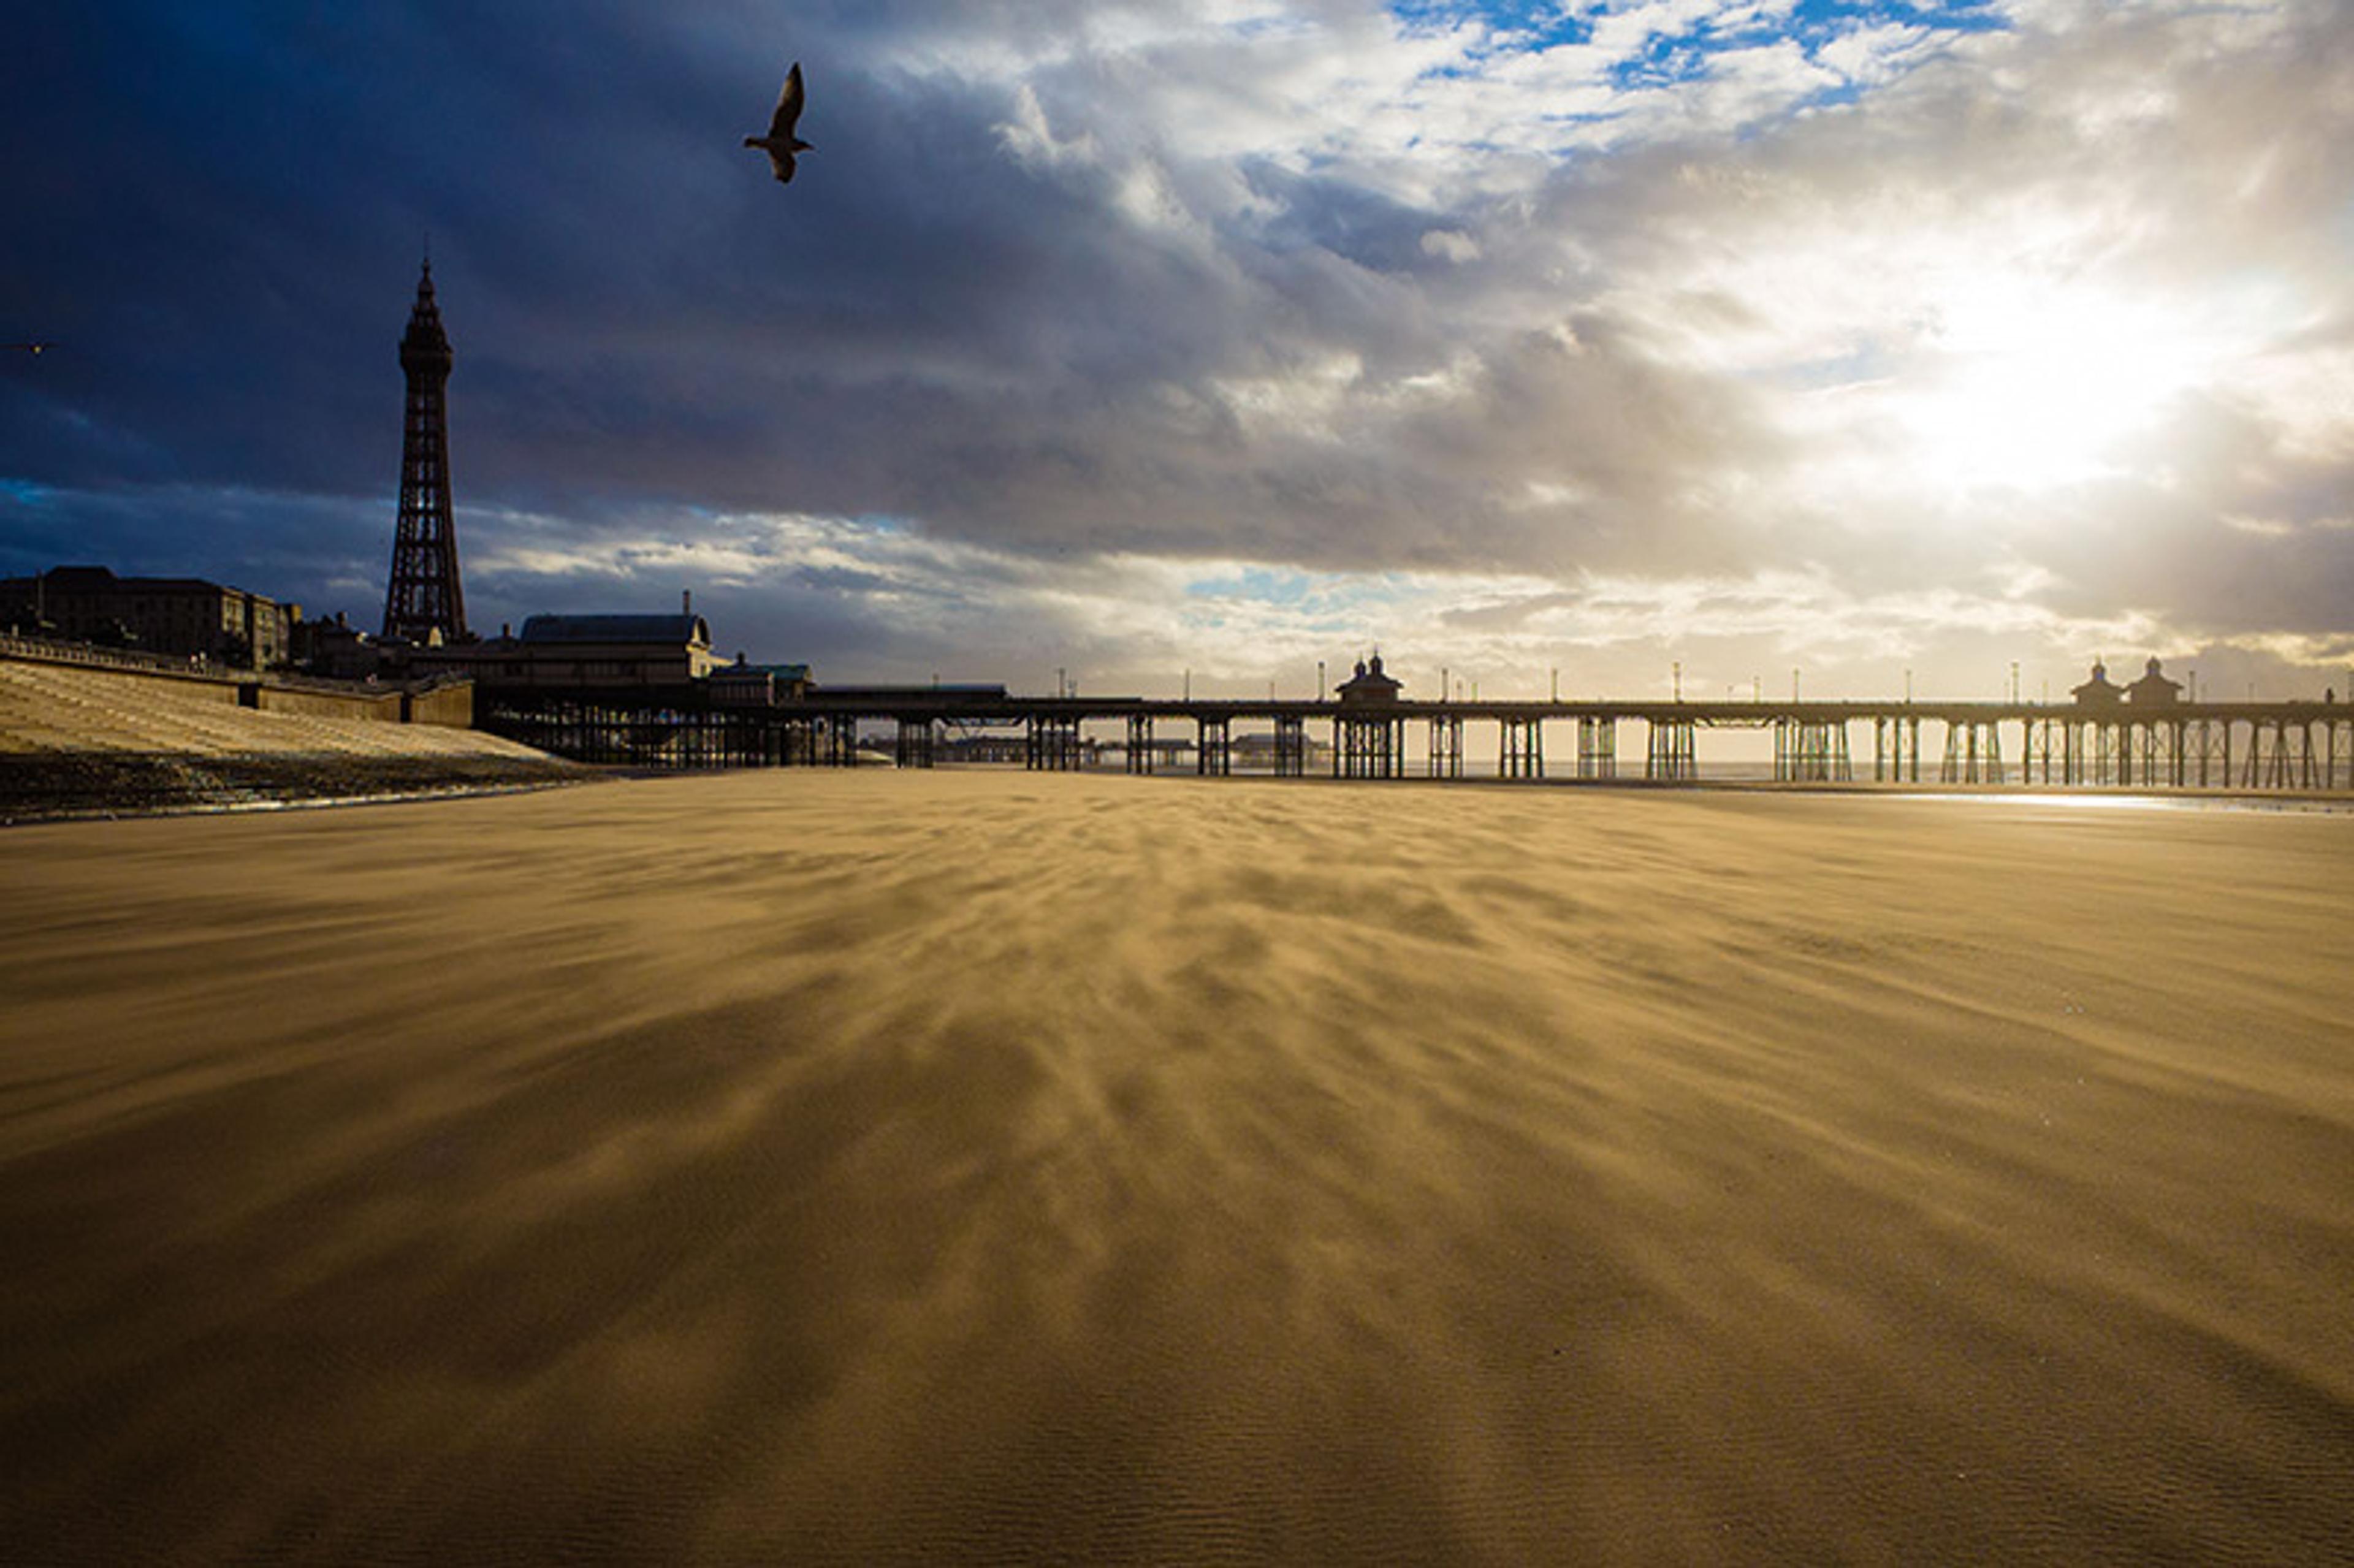 A side view of Blackpool pier seen from the beach at low tide. The sun is bursting through late afternoon clouds and the wind is forming patterns in the sand